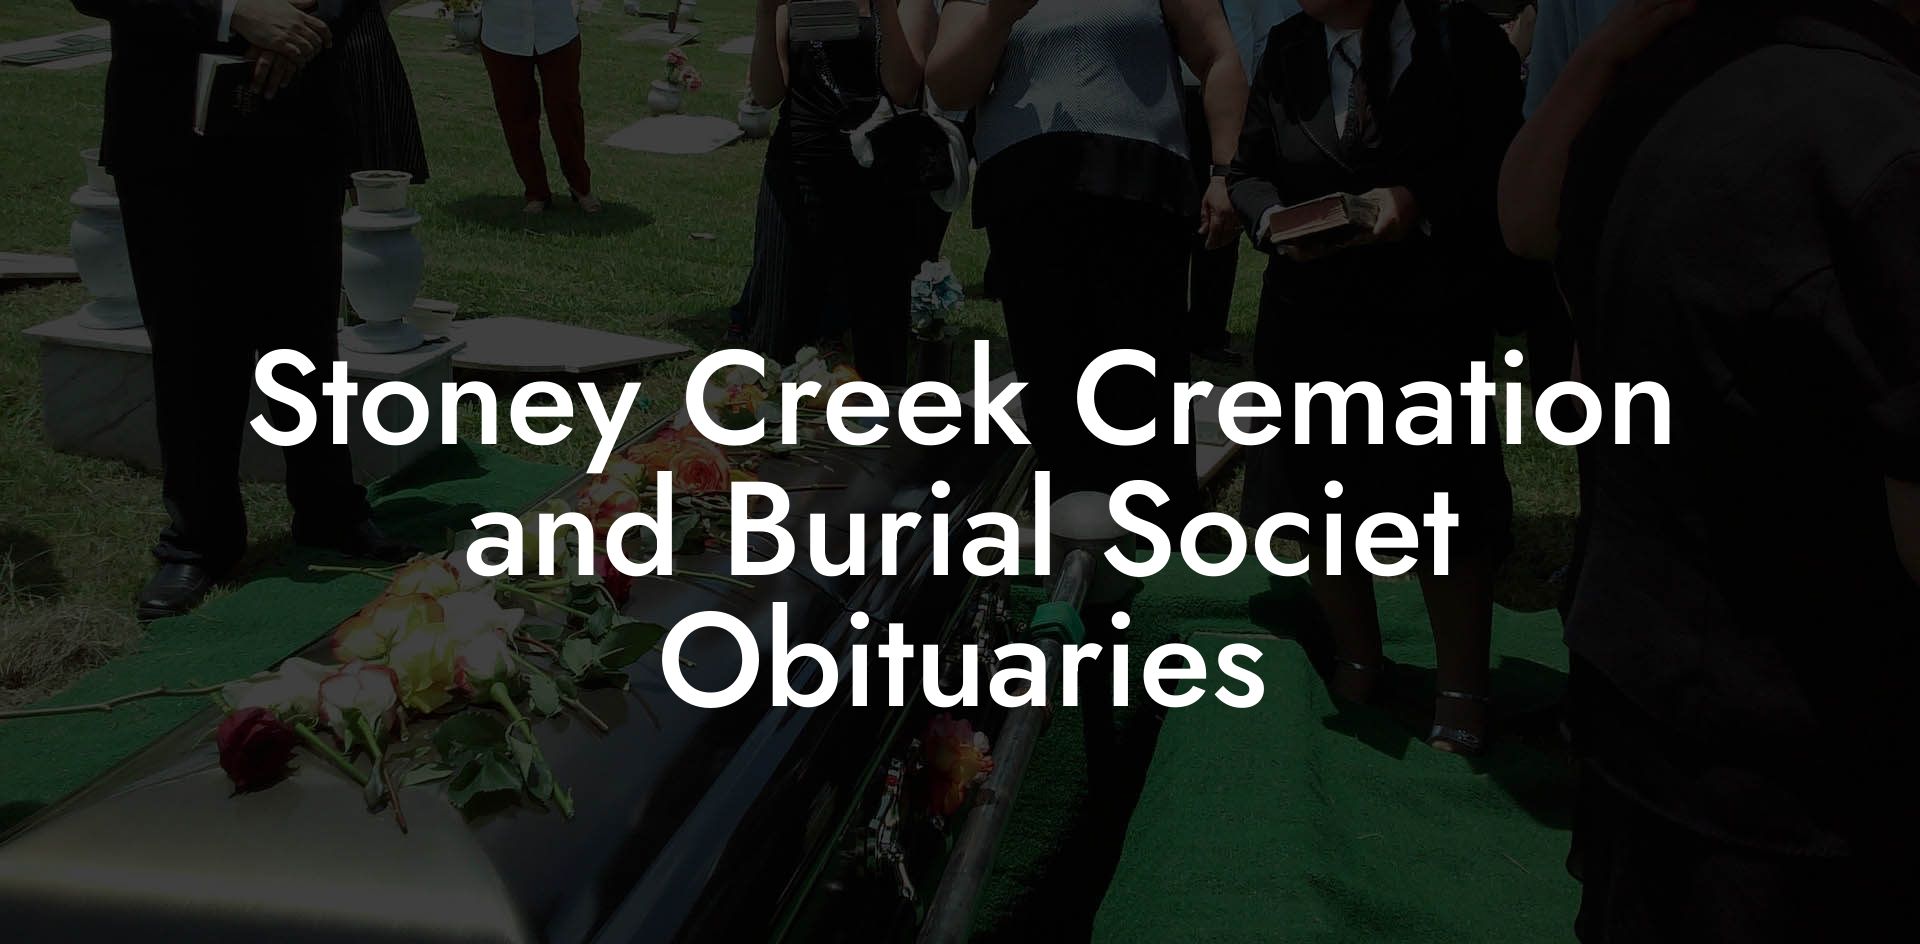 Stoney Creek Cremation and Burial Societ Obituaries